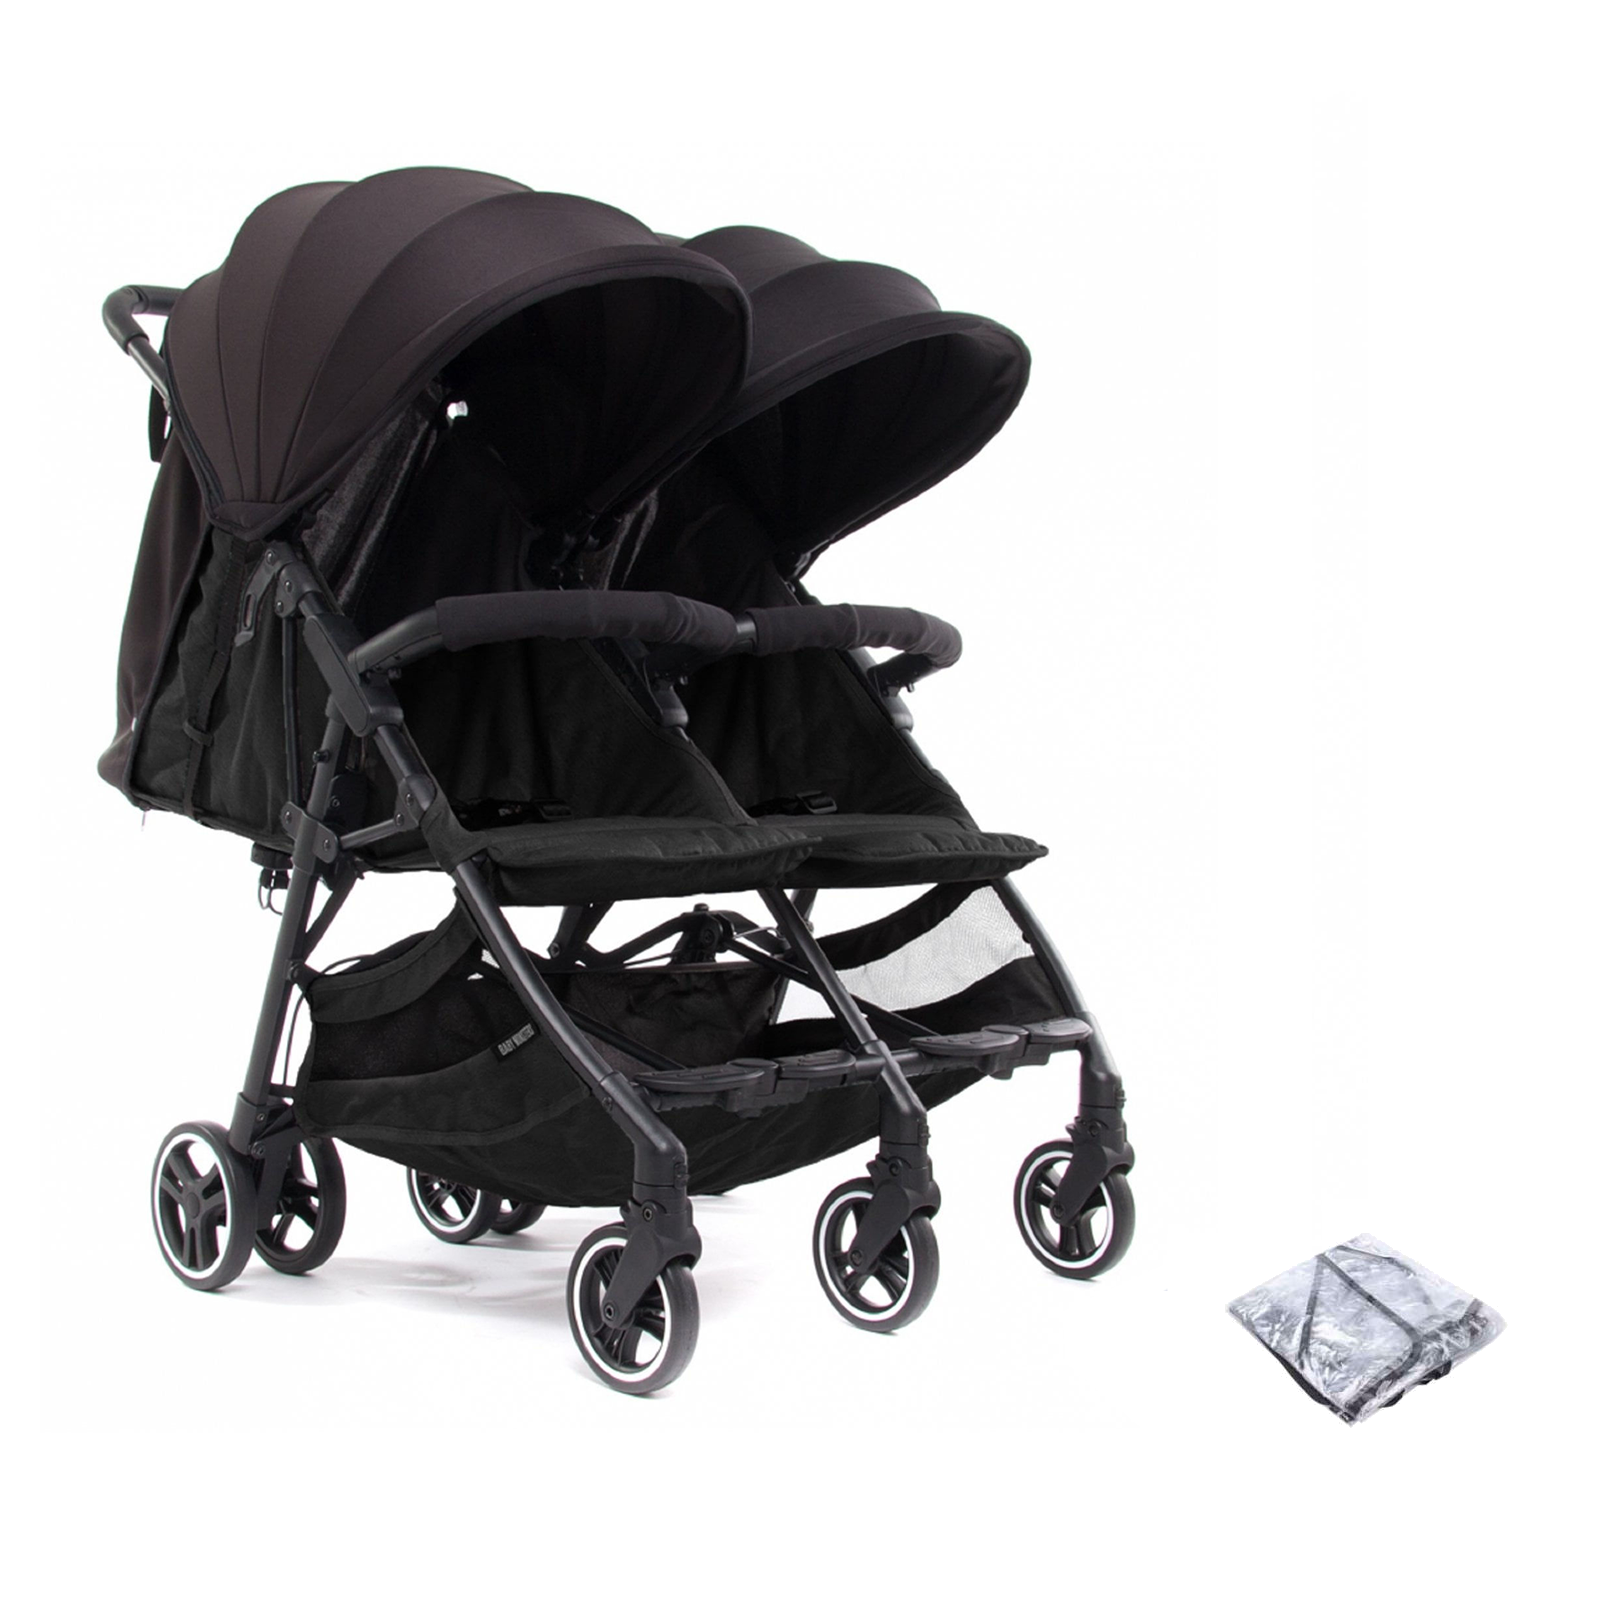 Baby Monsters Kuki Lightweight (9.8kg) Twin Double Pushchair with Raincover - Black